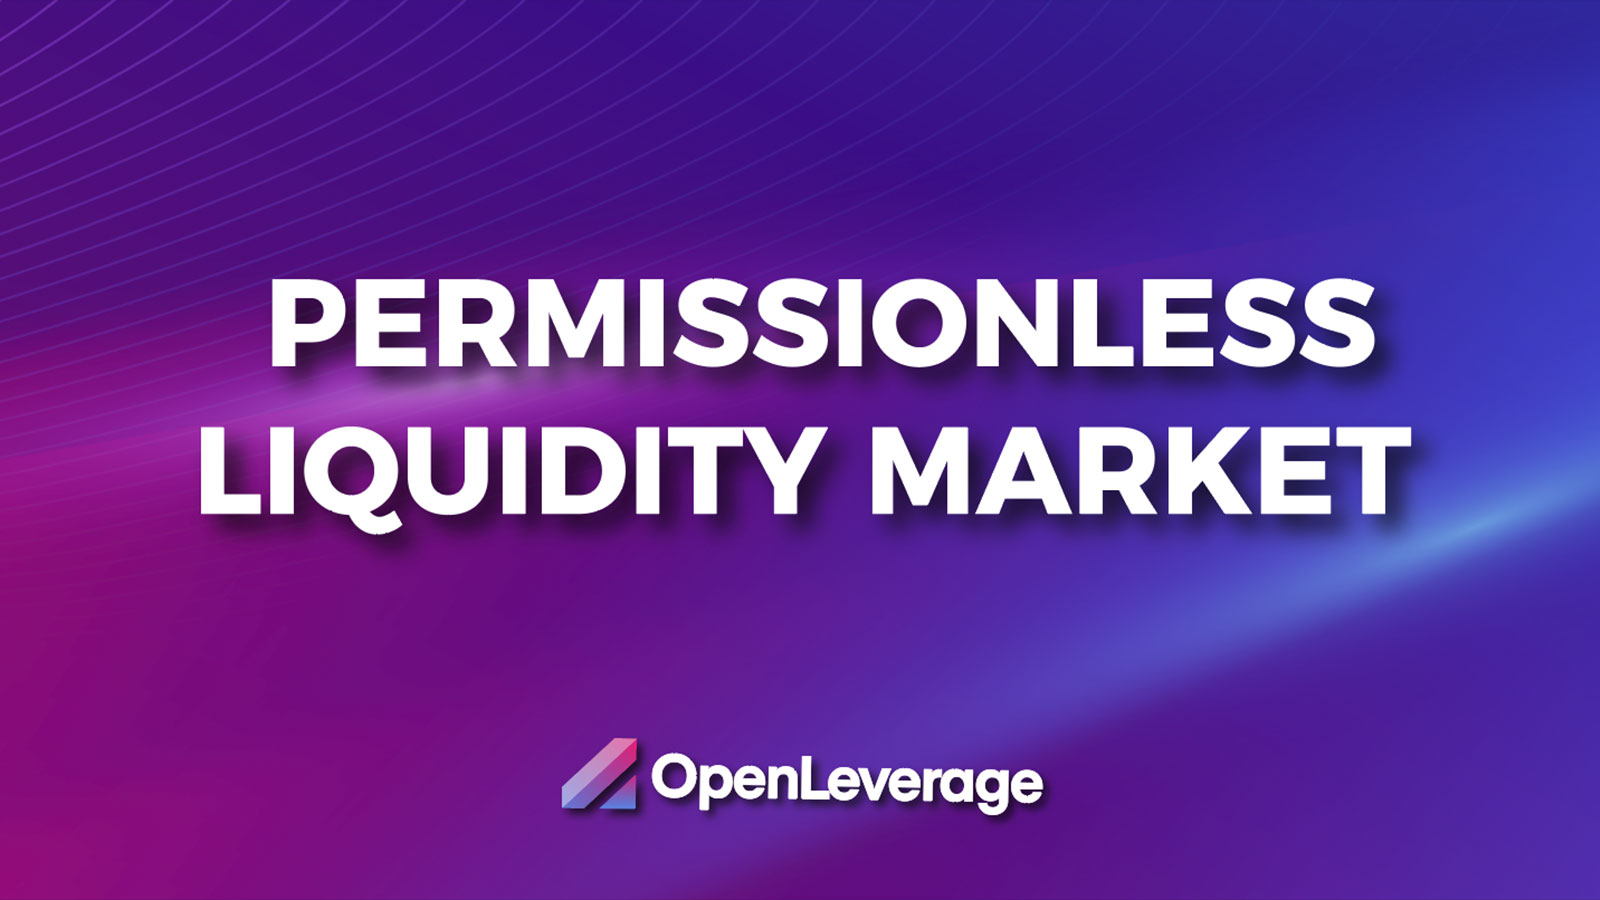 OpenLeverage Launches Permissionless Liquid Market to Empower Crypto Users and Projects